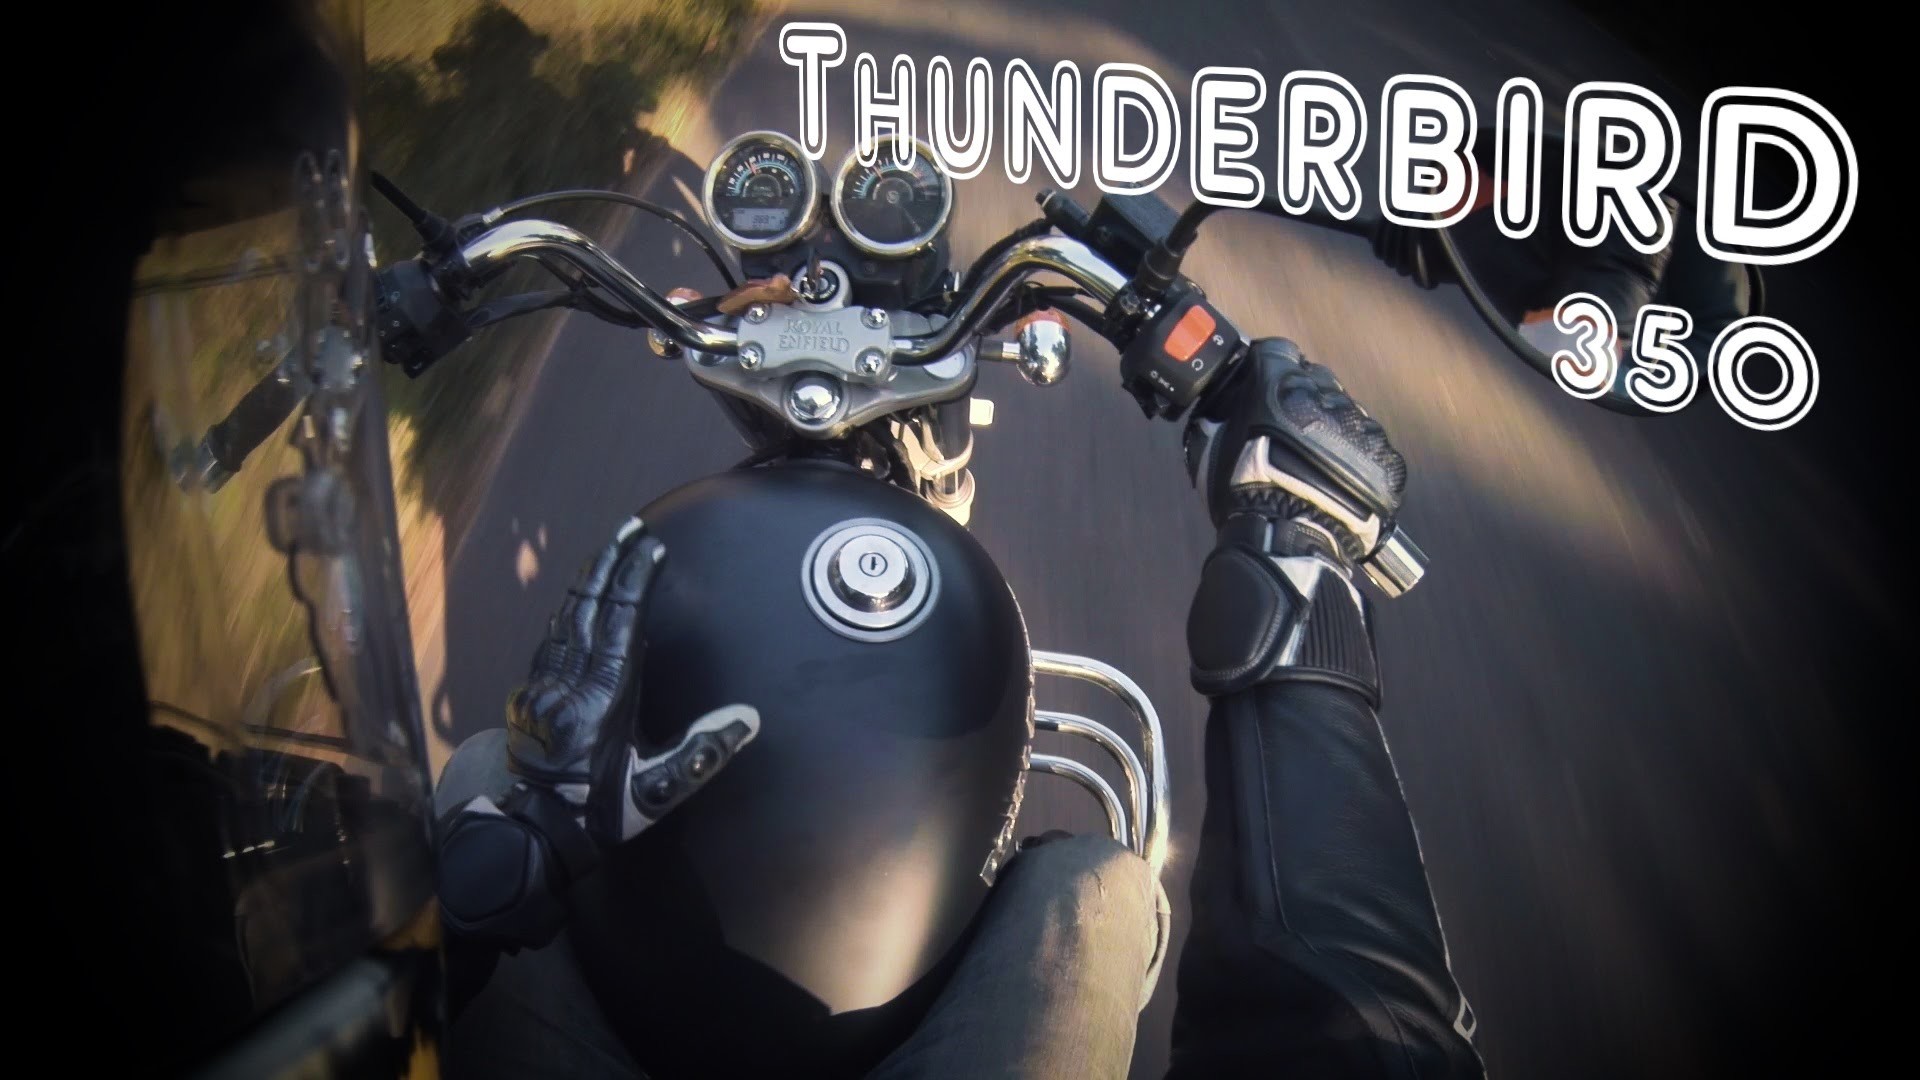 thunderbird 350 hd wallpapers,motorcycle accessories,motorcycle,vehicle,helmet,personal protective equipment